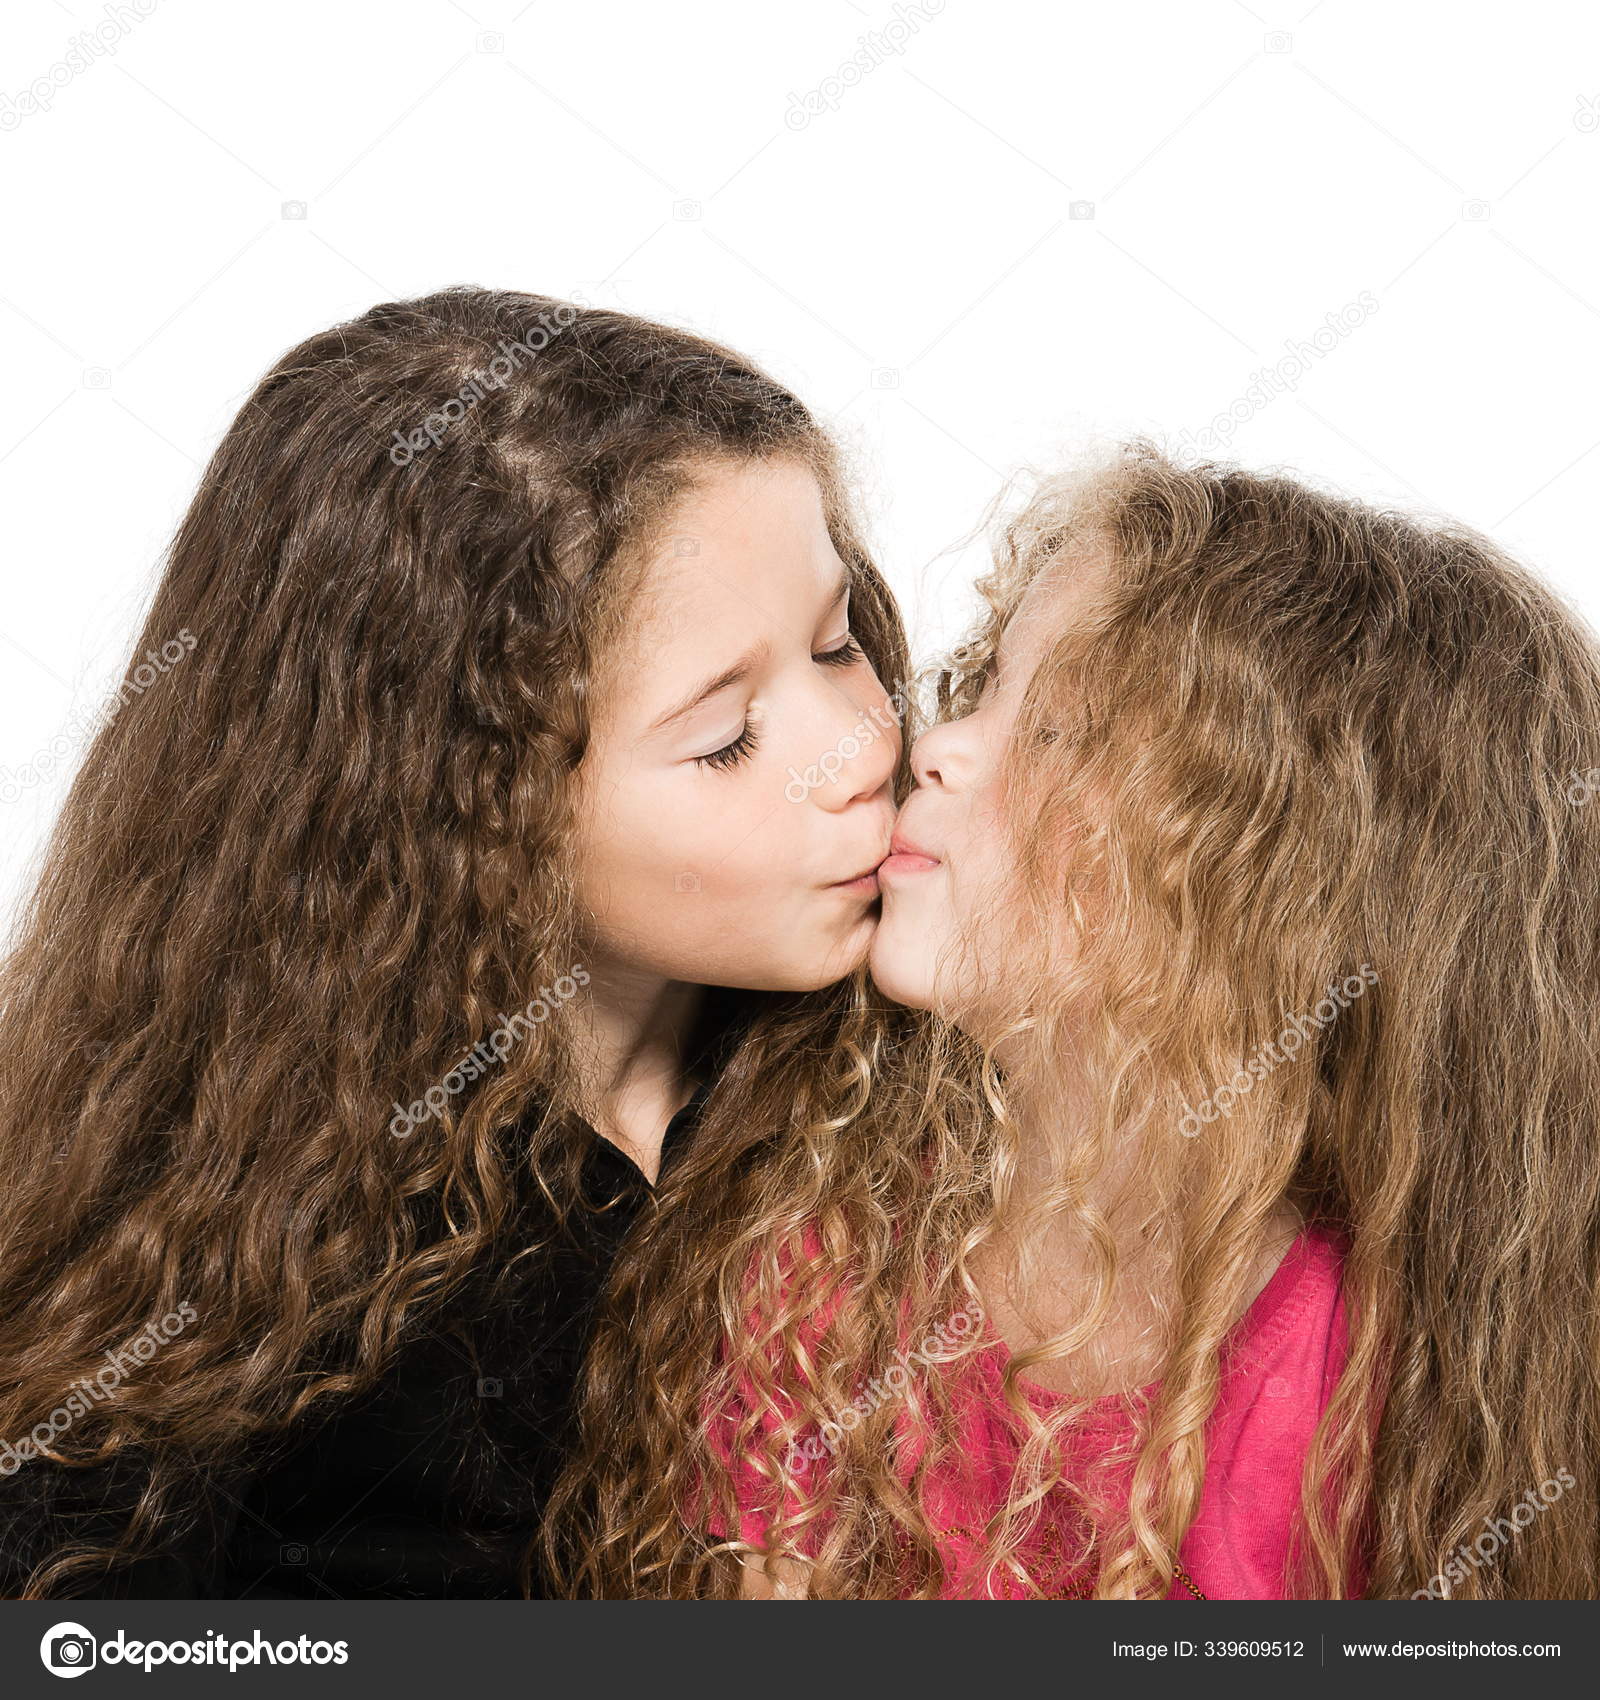 Teens Kissing And Licking Each Other